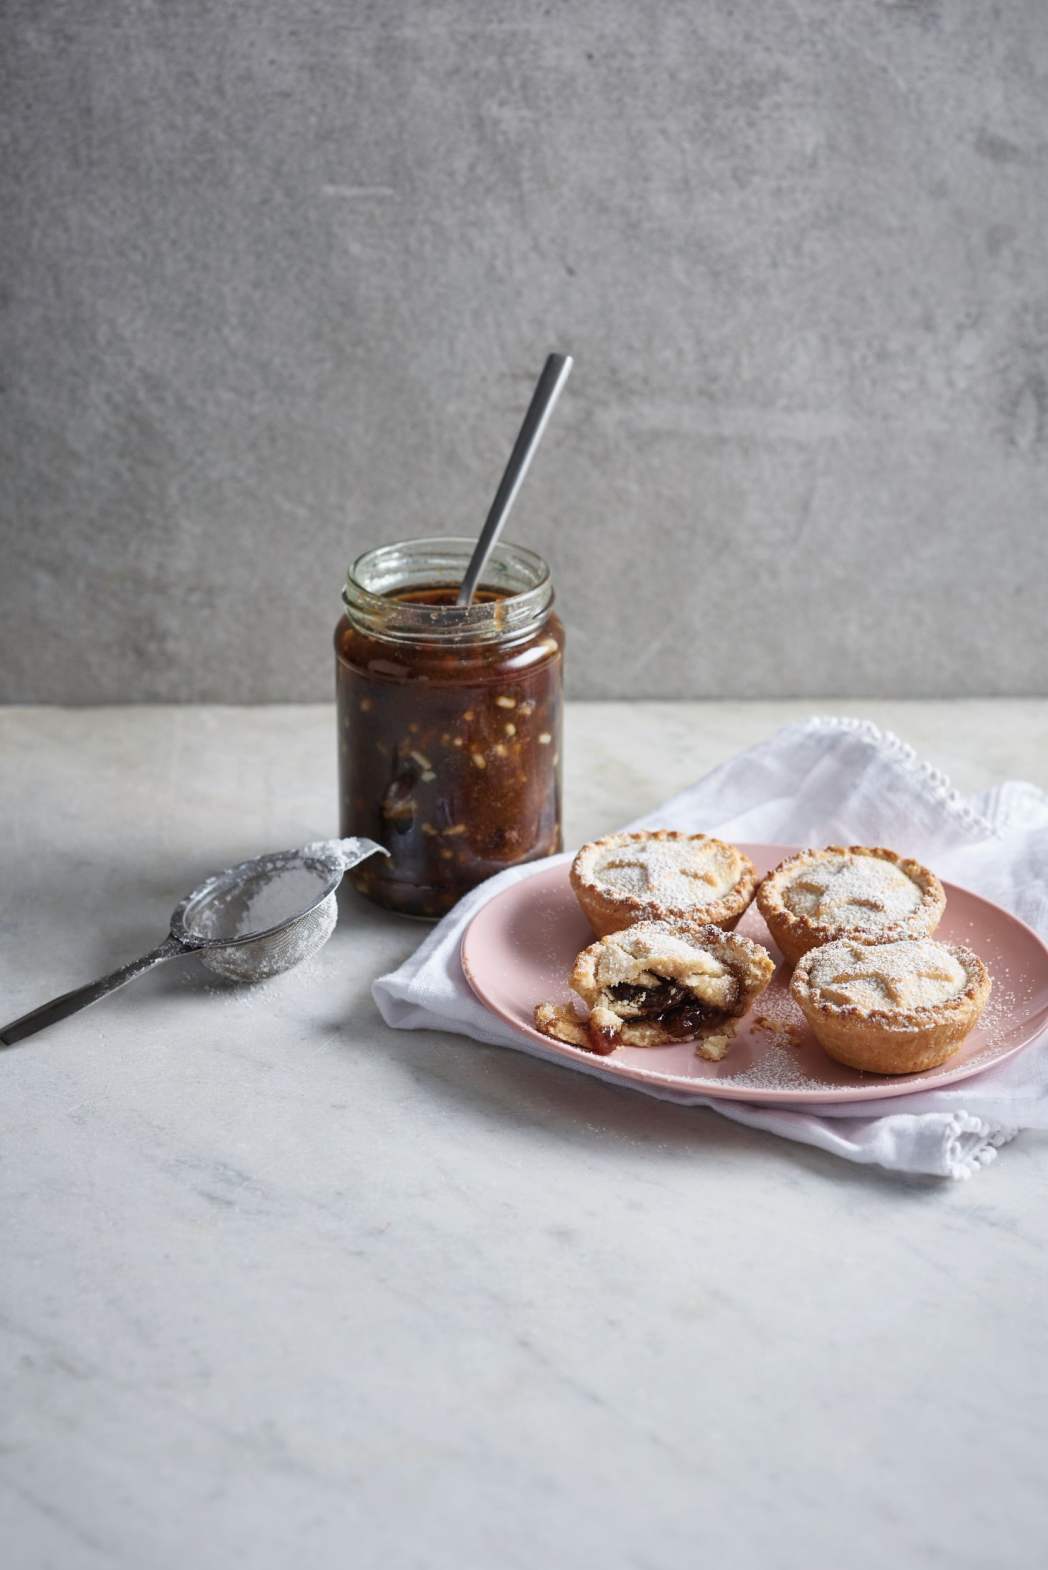 Image for blog - 7 Delicious Ways to use up Leftover Mincemeat